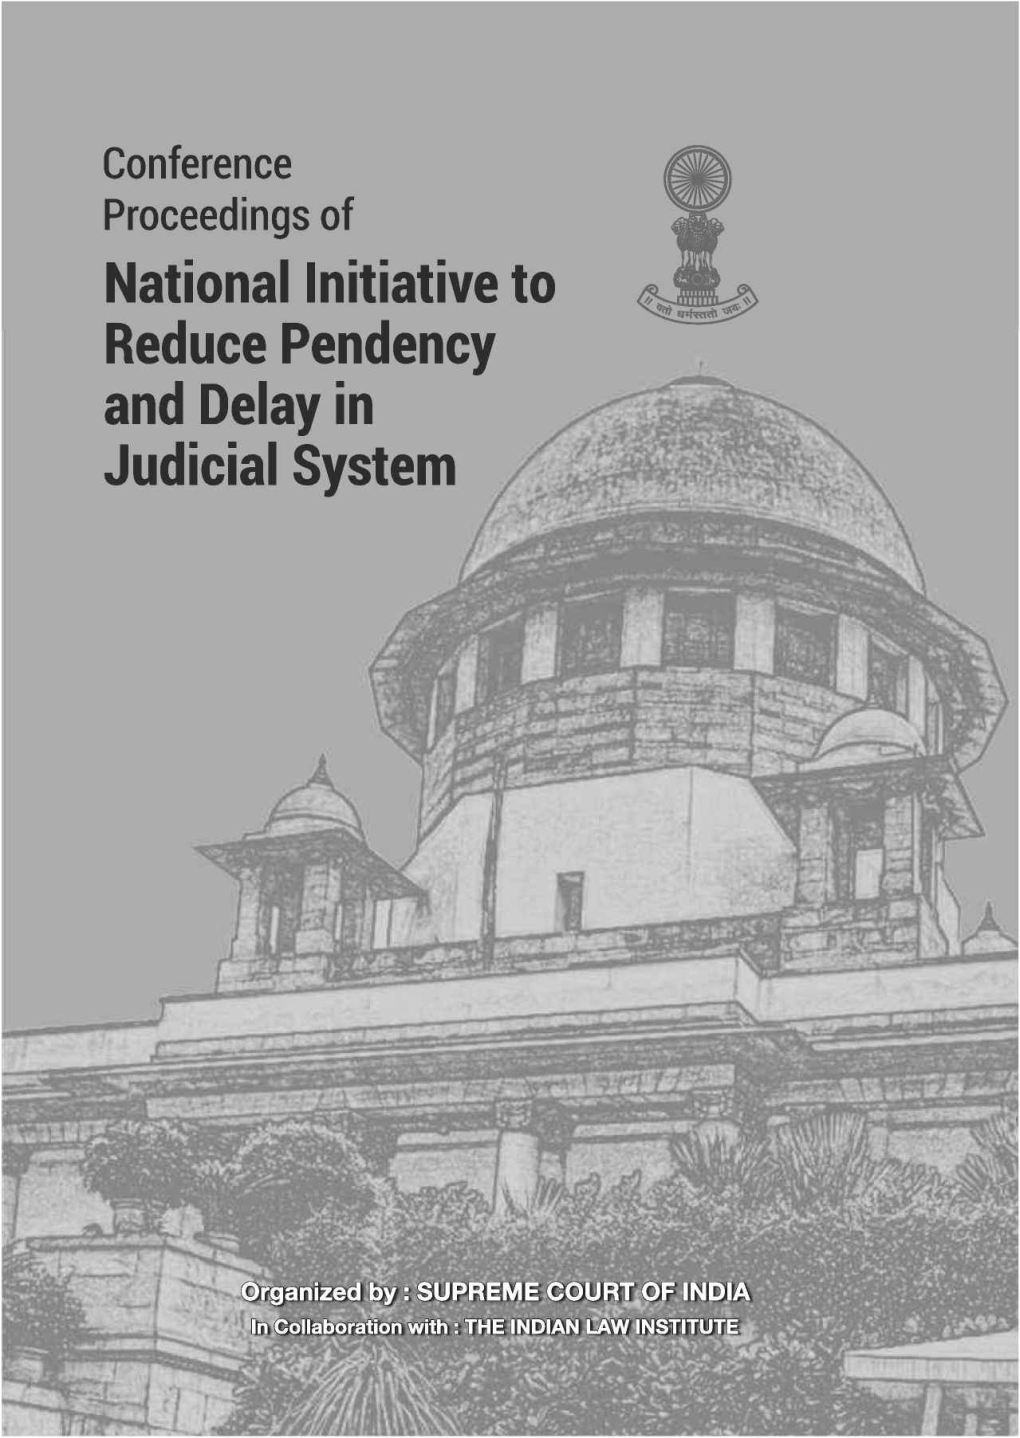 National Initiative to Reduce Pendency and Delay in Judicial System